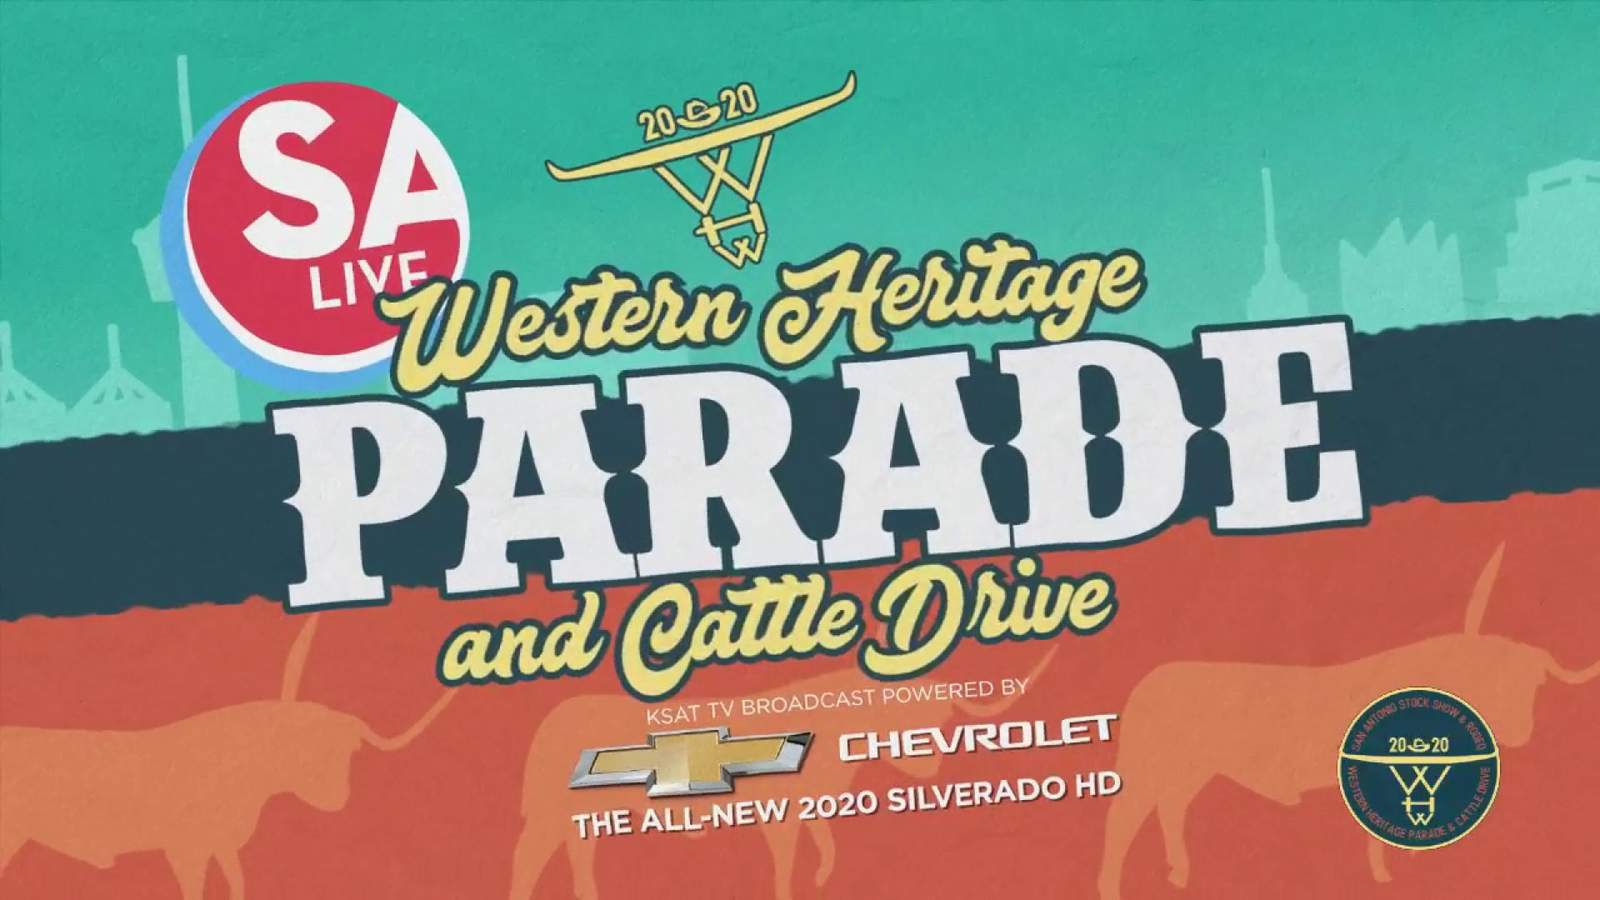 Watch: Western Heritage Parade and Cattle Drive